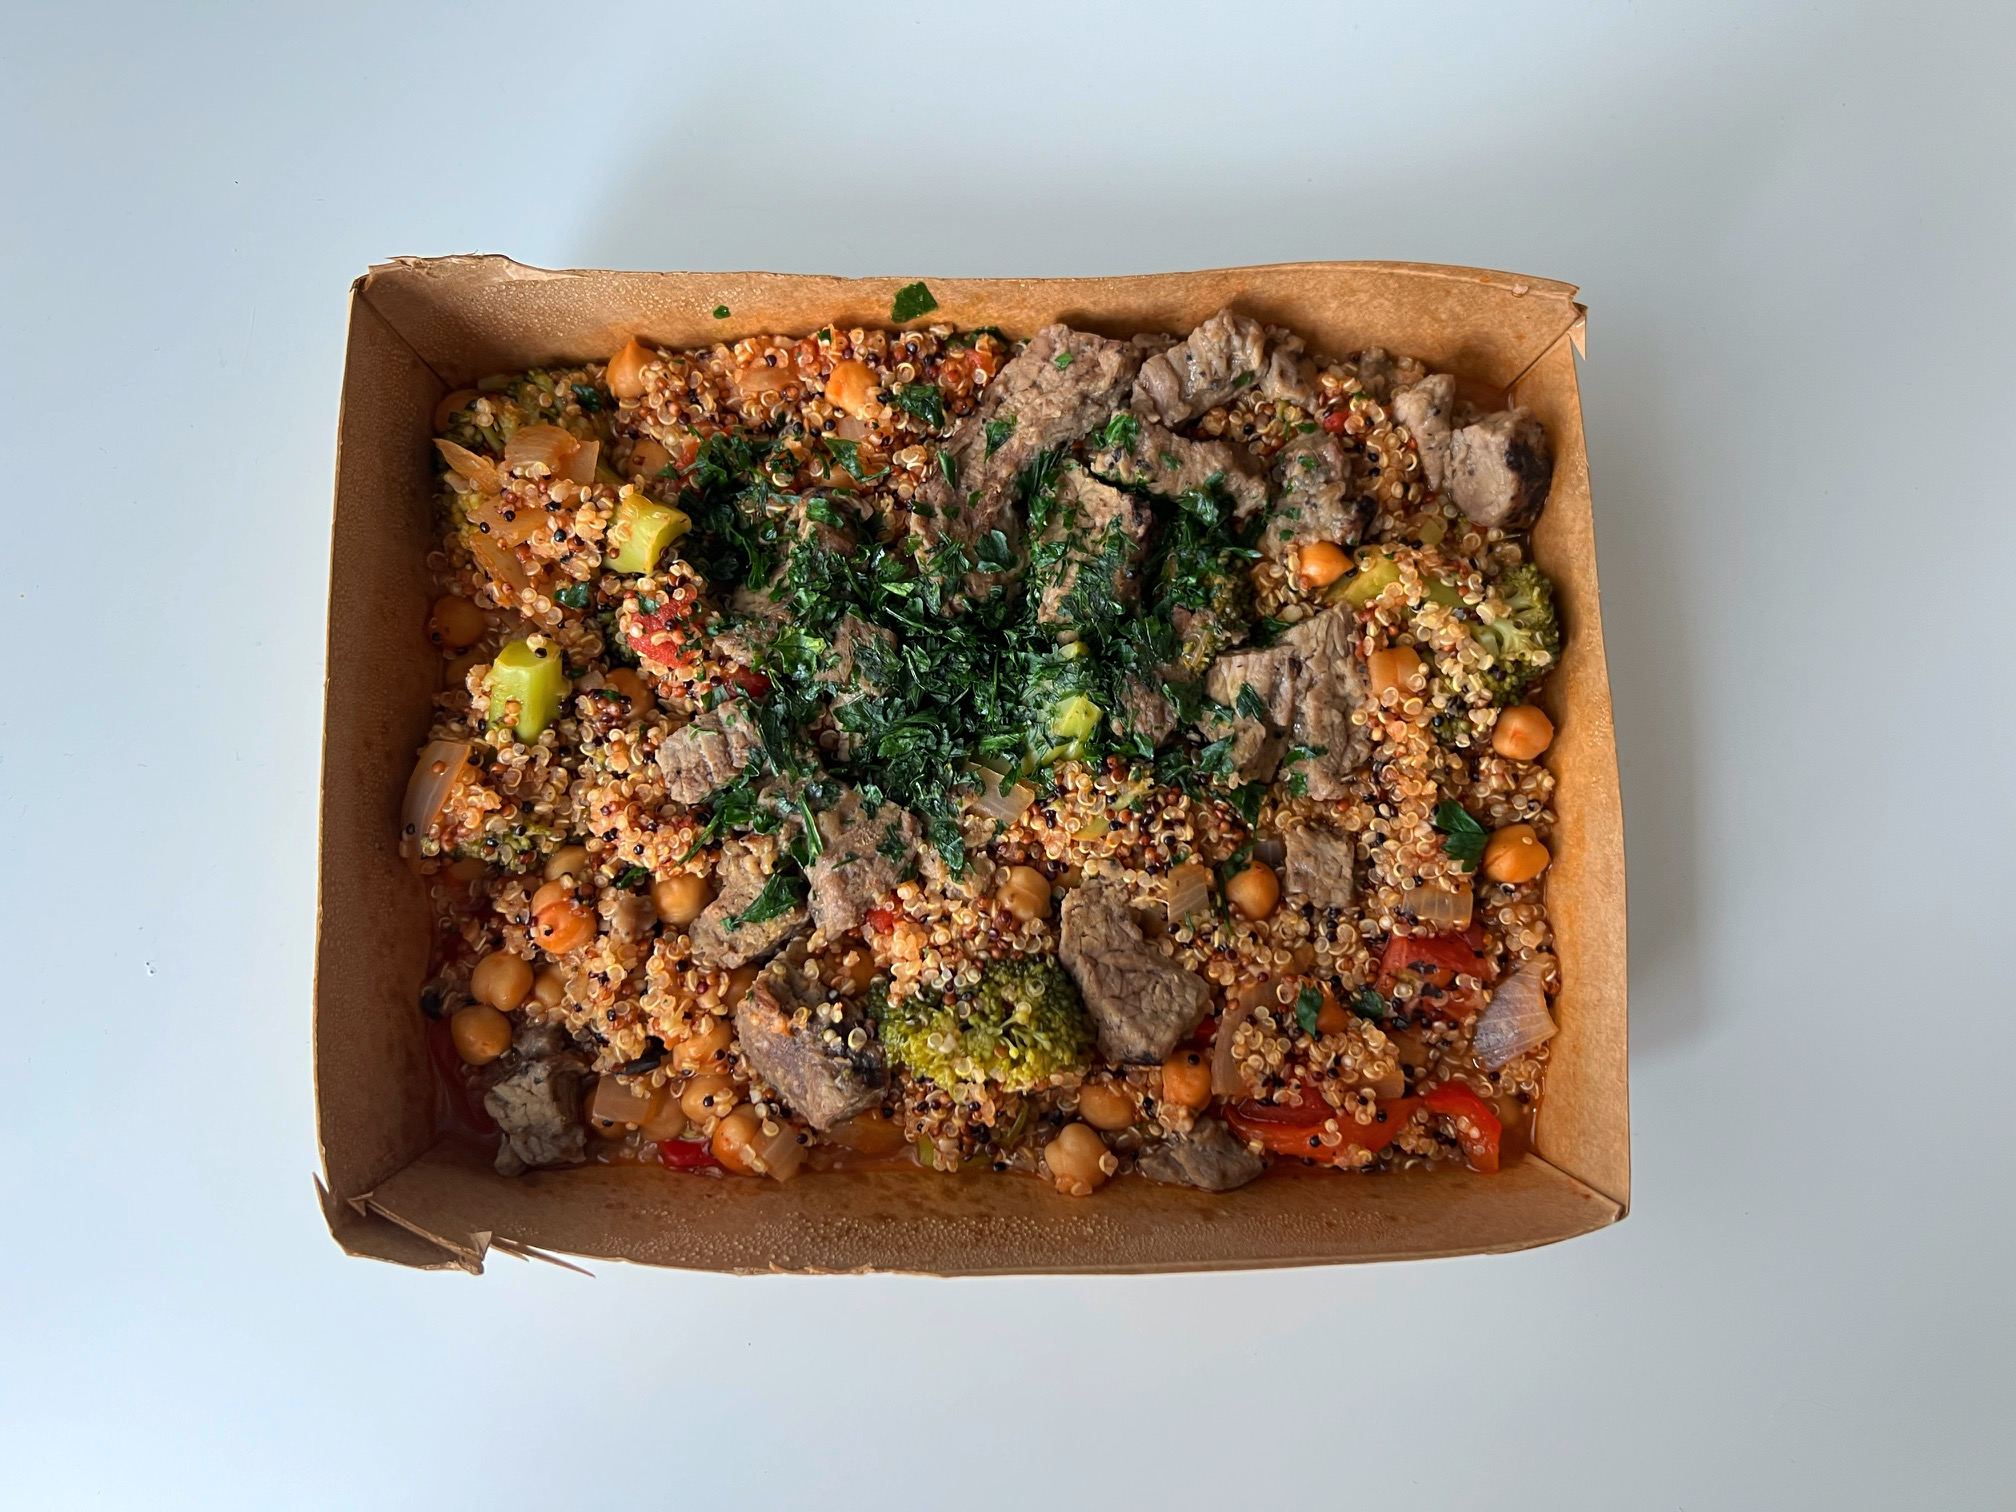 On a white table, there is a cardboard box with quinoa, beef, broccoli, chickpeas, and veggies topped with cilantro. Photo by Alyssa Buckley.